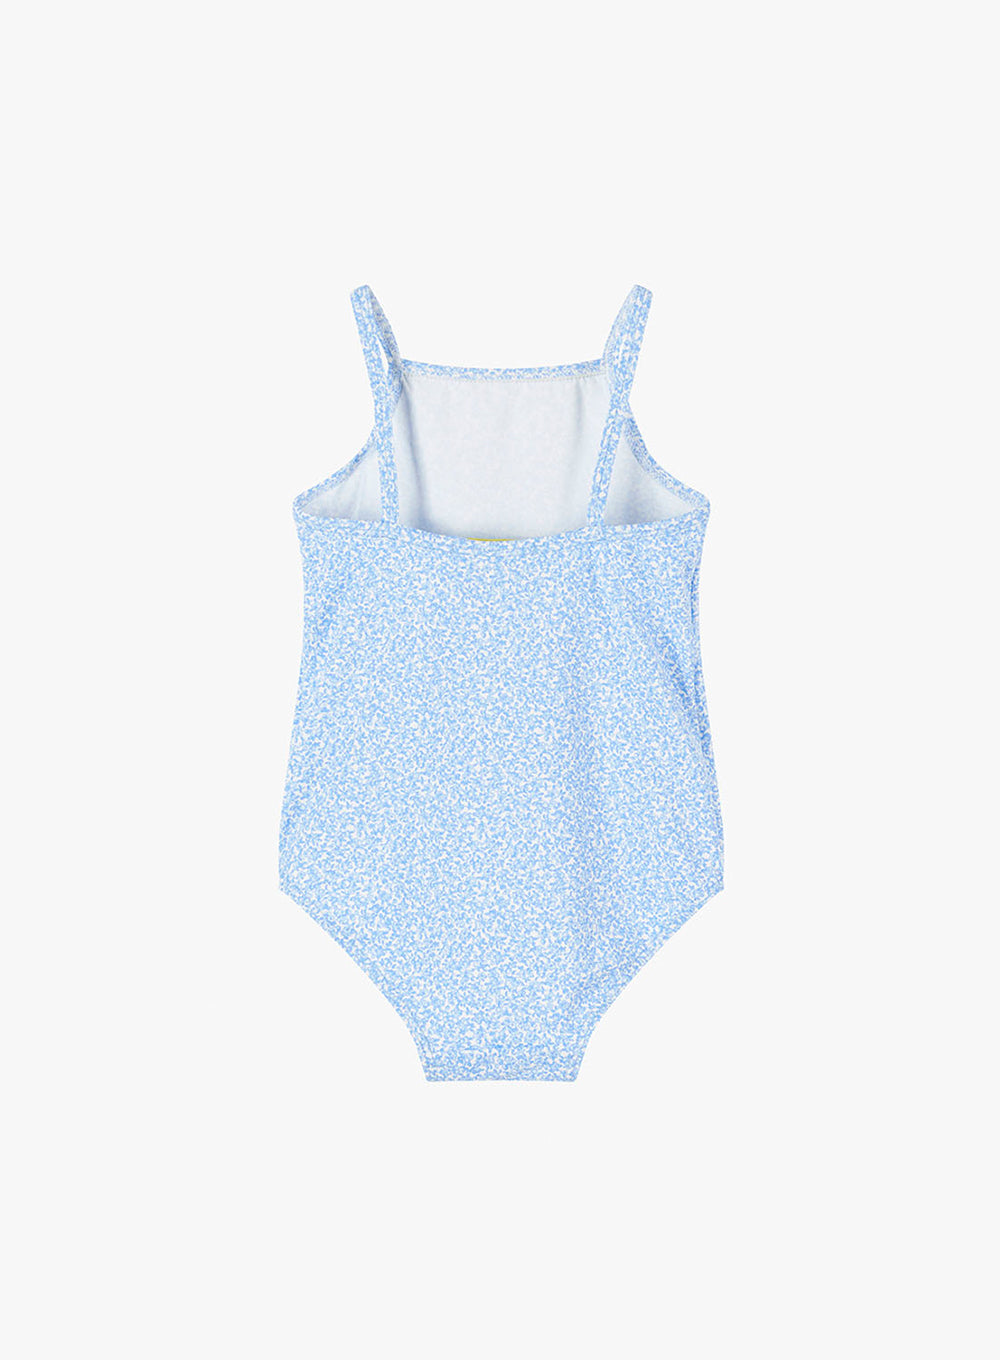 Frill Swimsuit in Miniature Floral | Trotters Childrenswear – Trotters ...